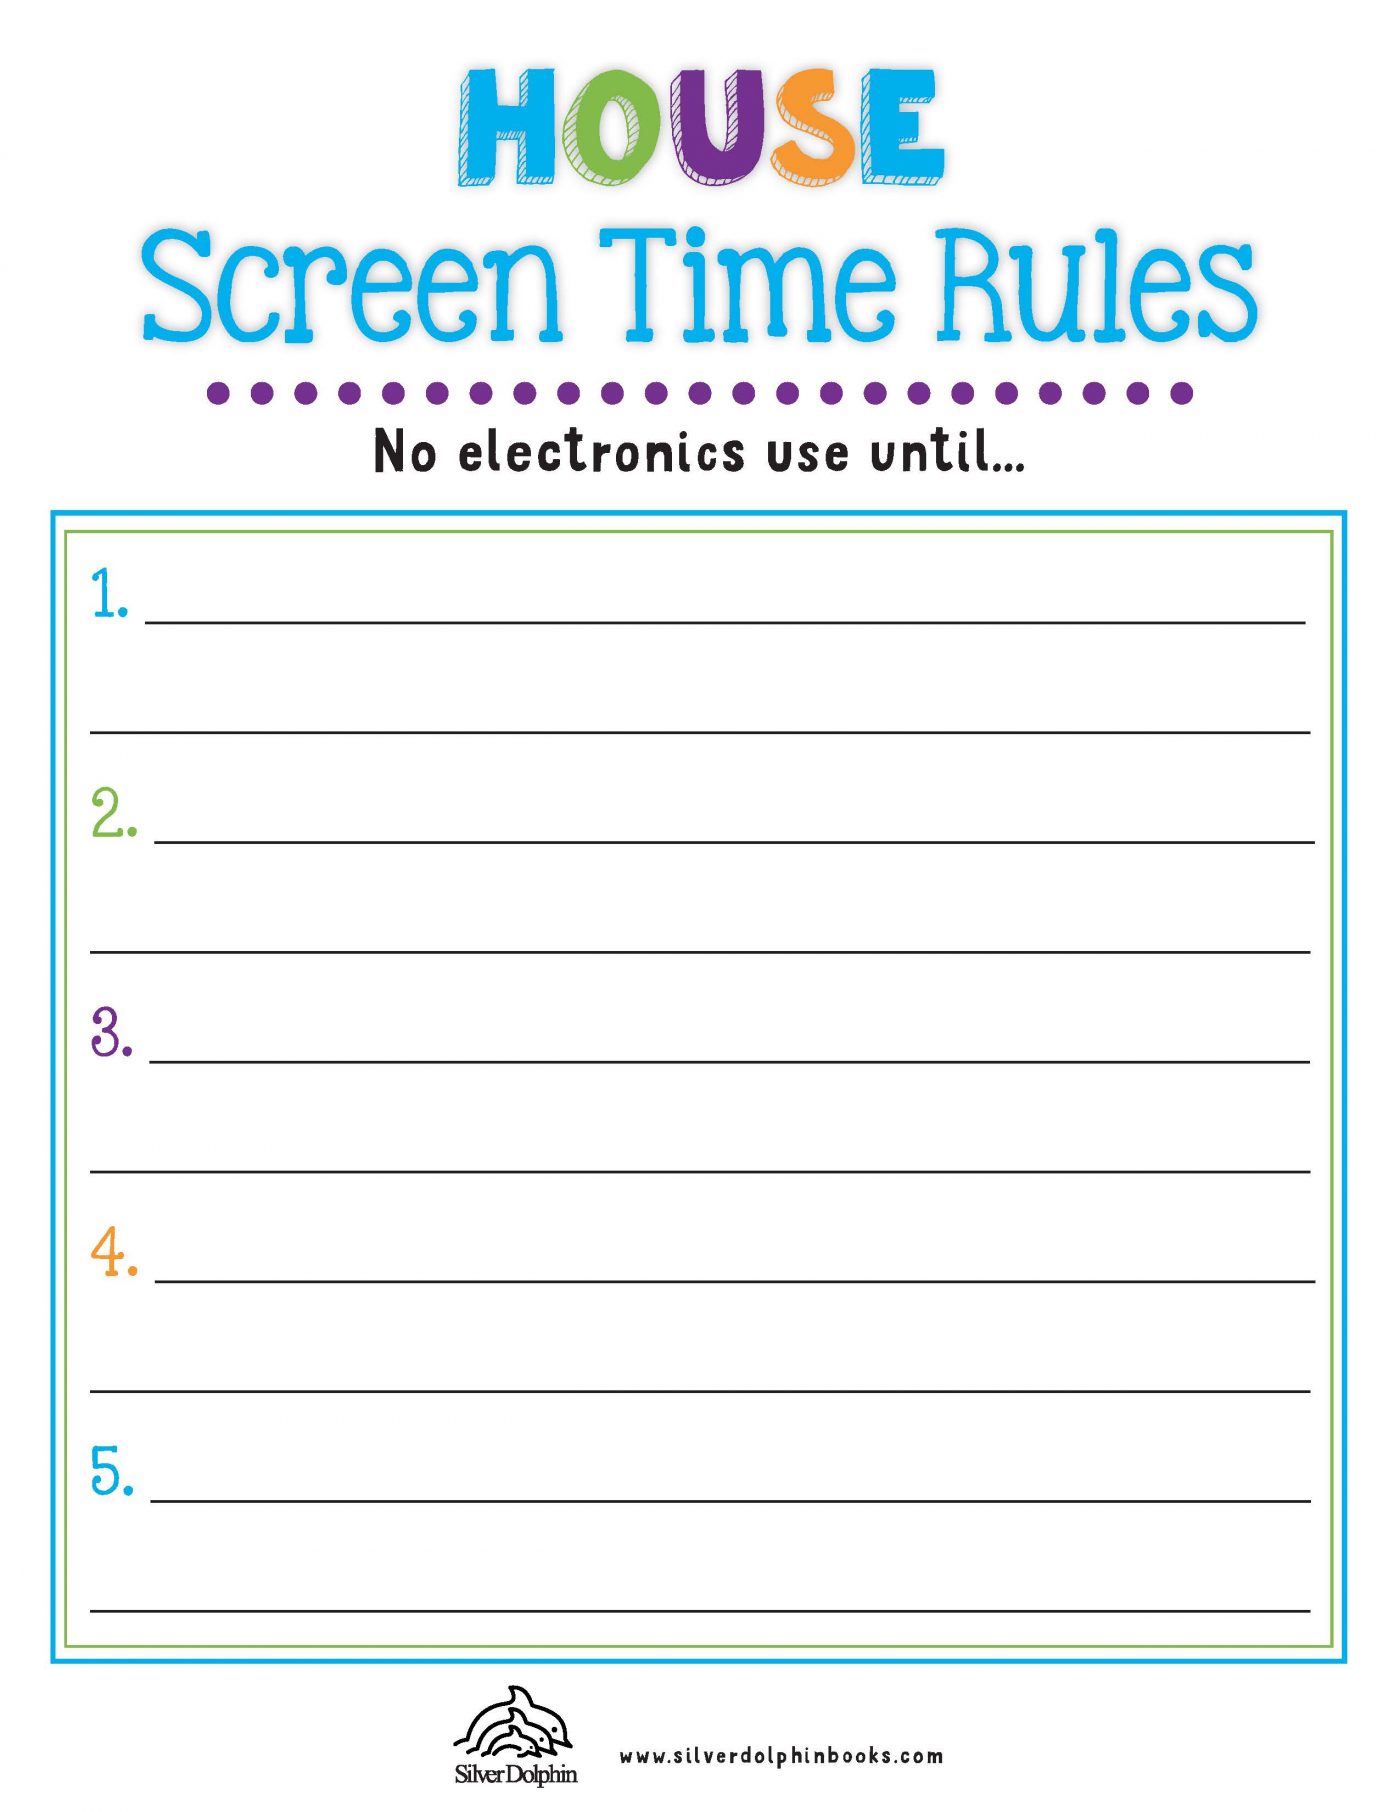 summer-screen-time-rules-checklists-silver-dolphin-books